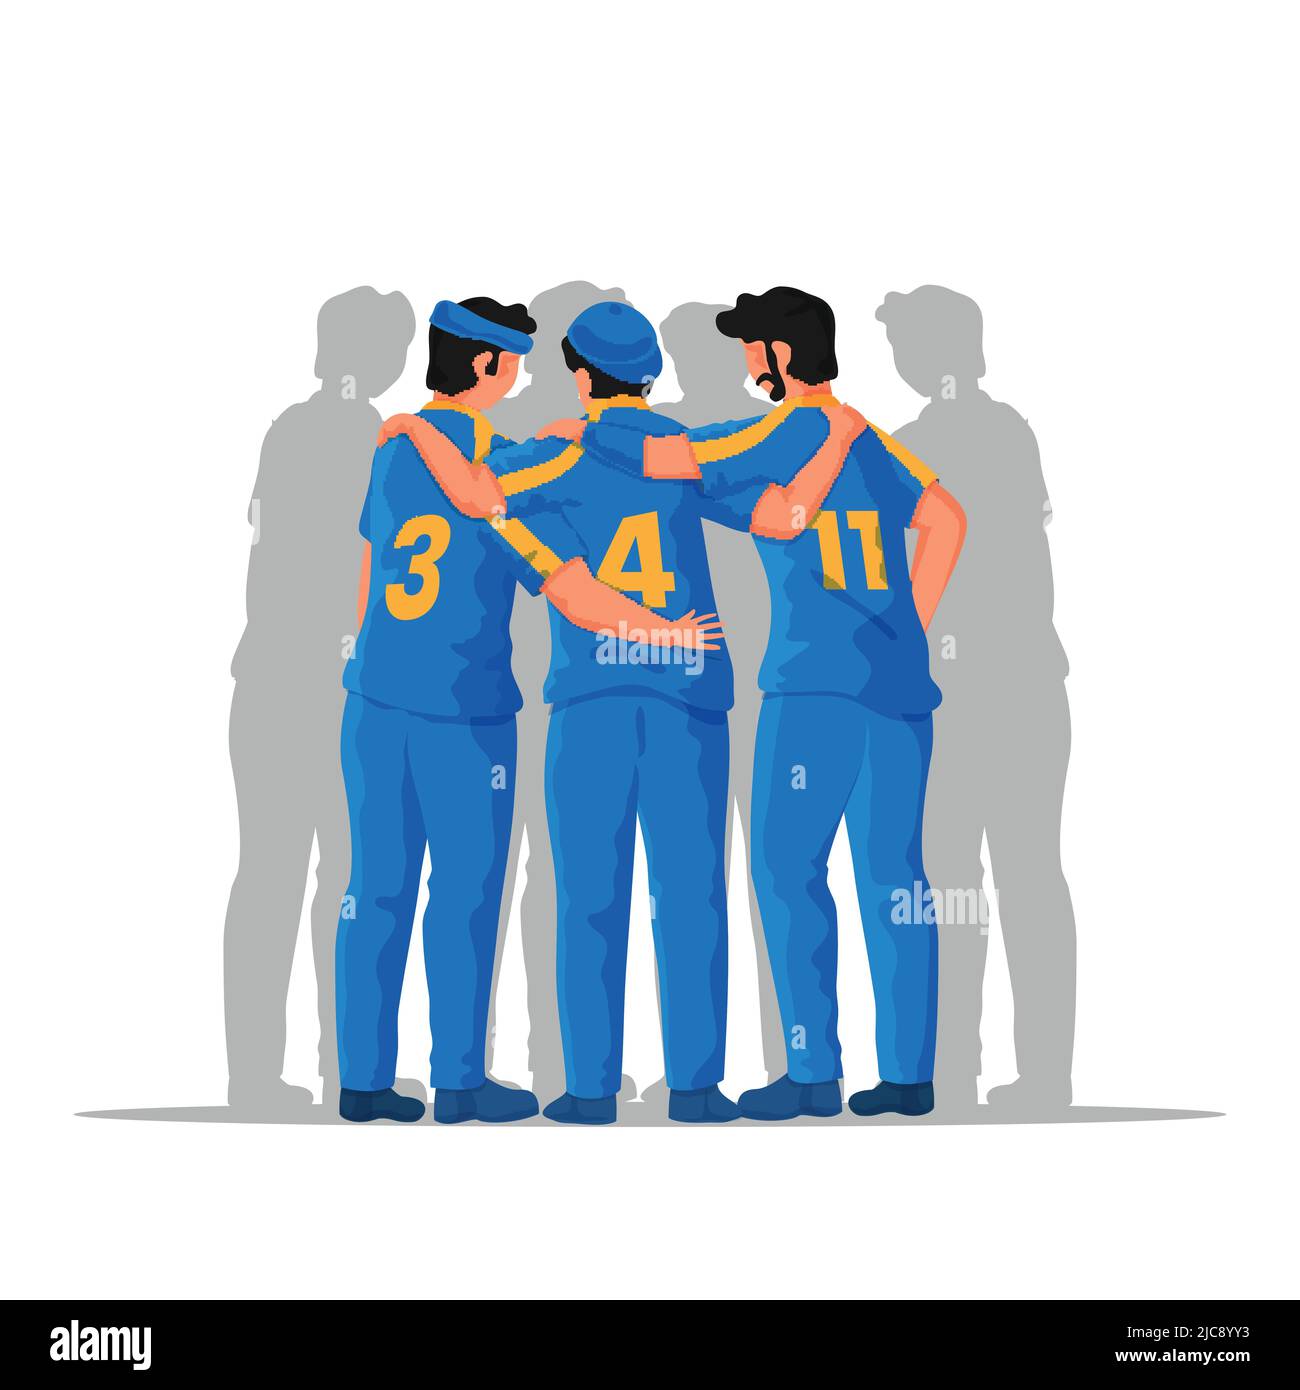 Back View Of Cricket Players Standing Together On White Background. Stock Vector